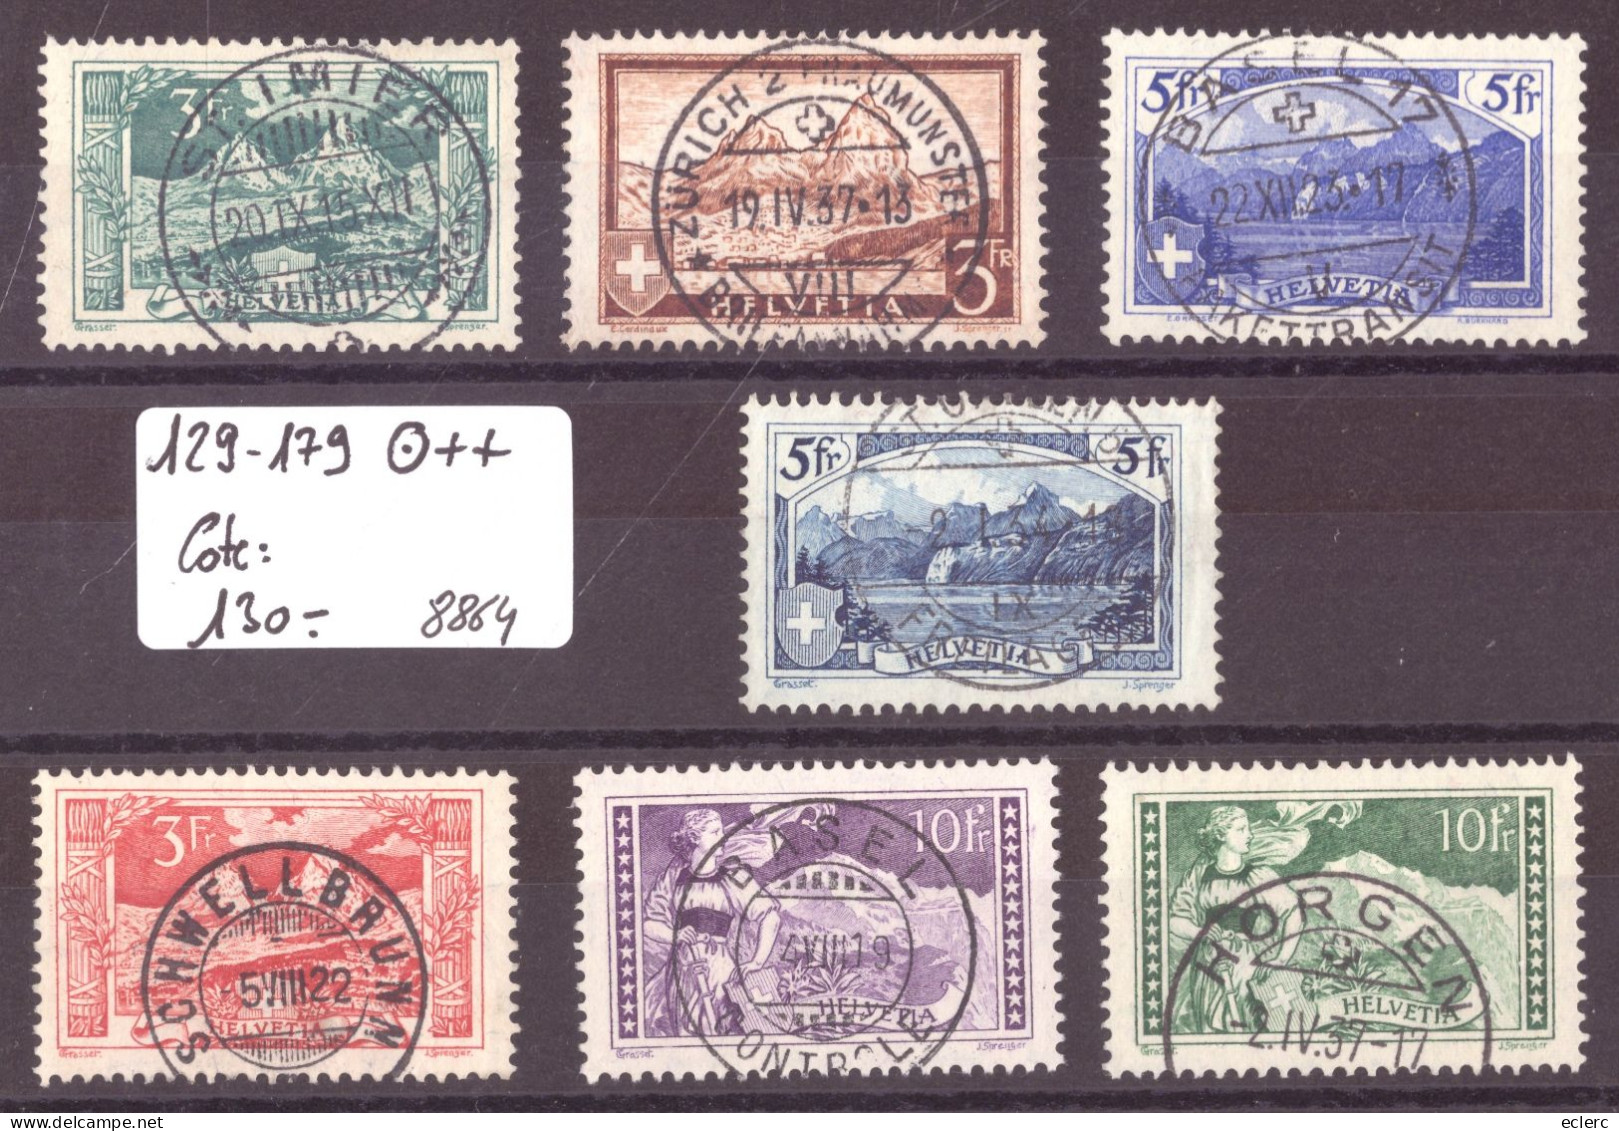 No 129-179 OBLITERATIONS CHOISIES - COTE: 130.- - Used Stamps